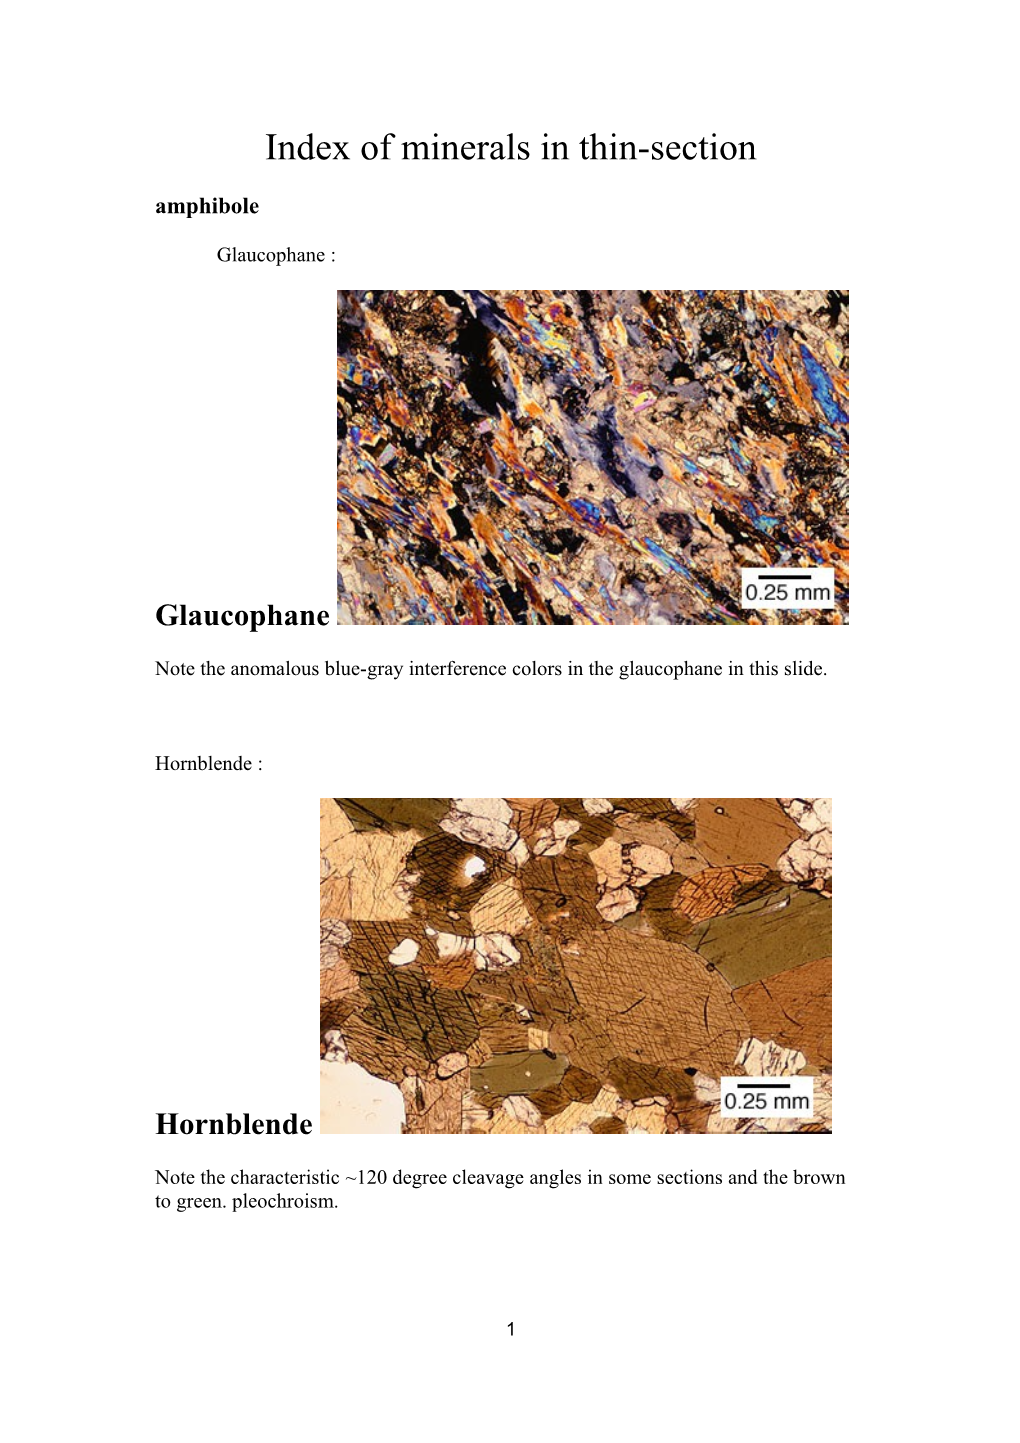 Index of Minerals in Thin-Section